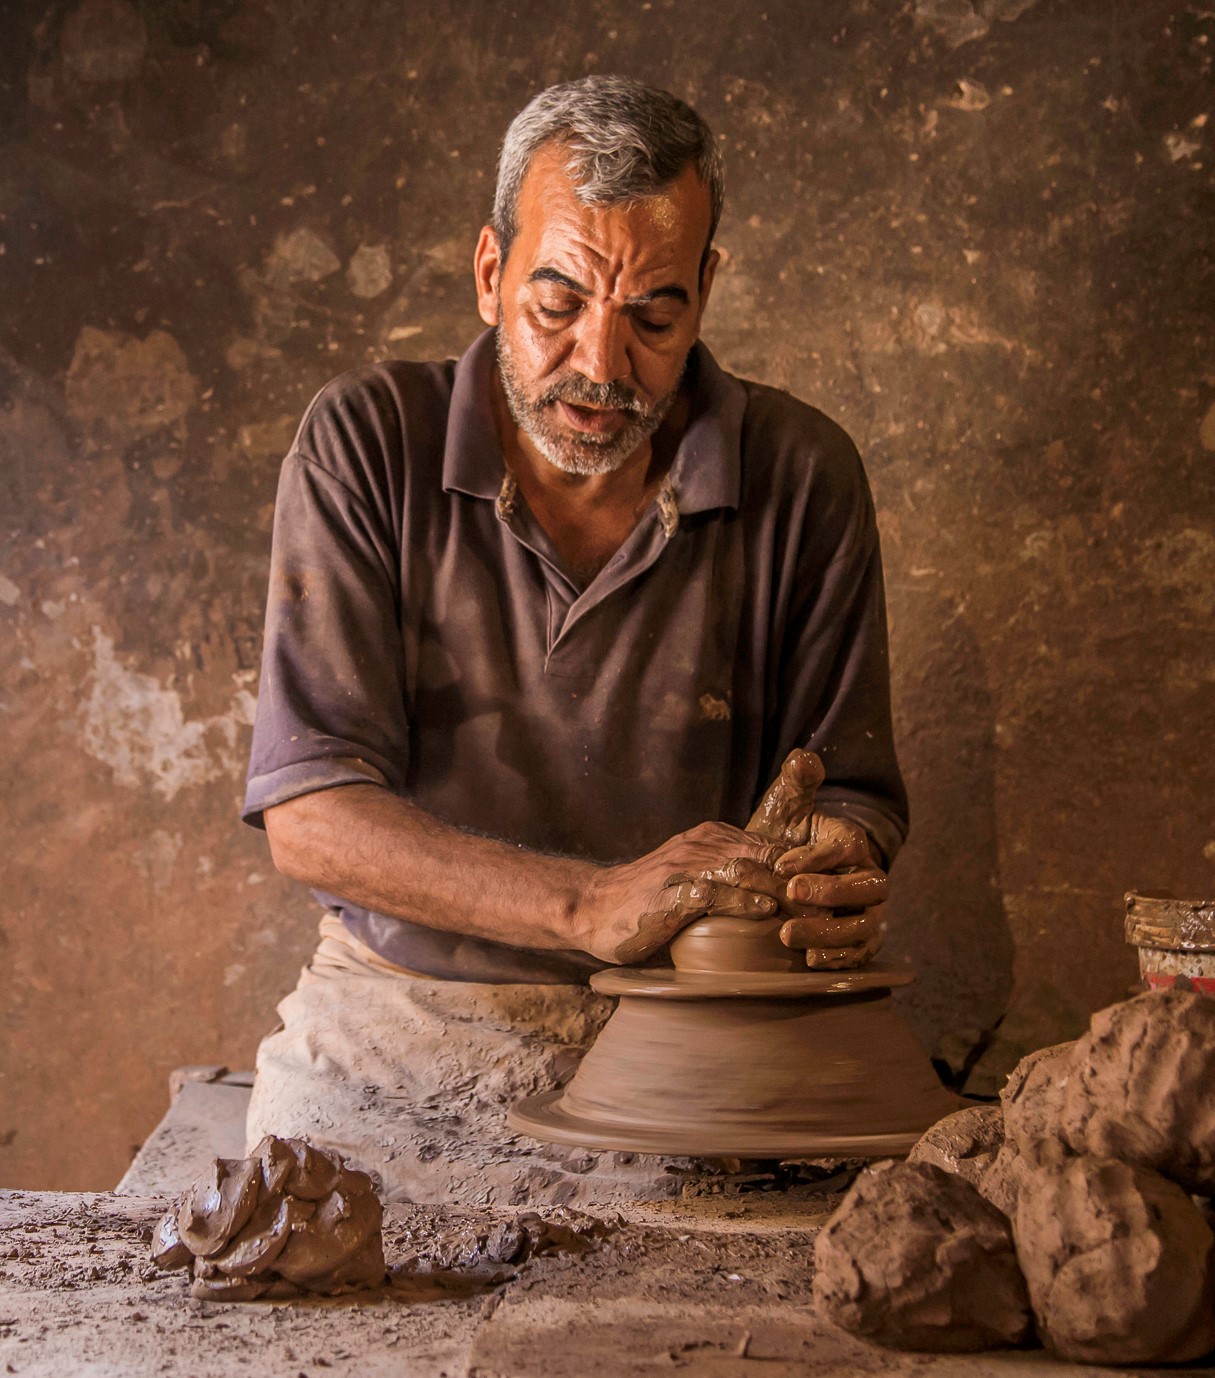 A man making a clay vase with his hands